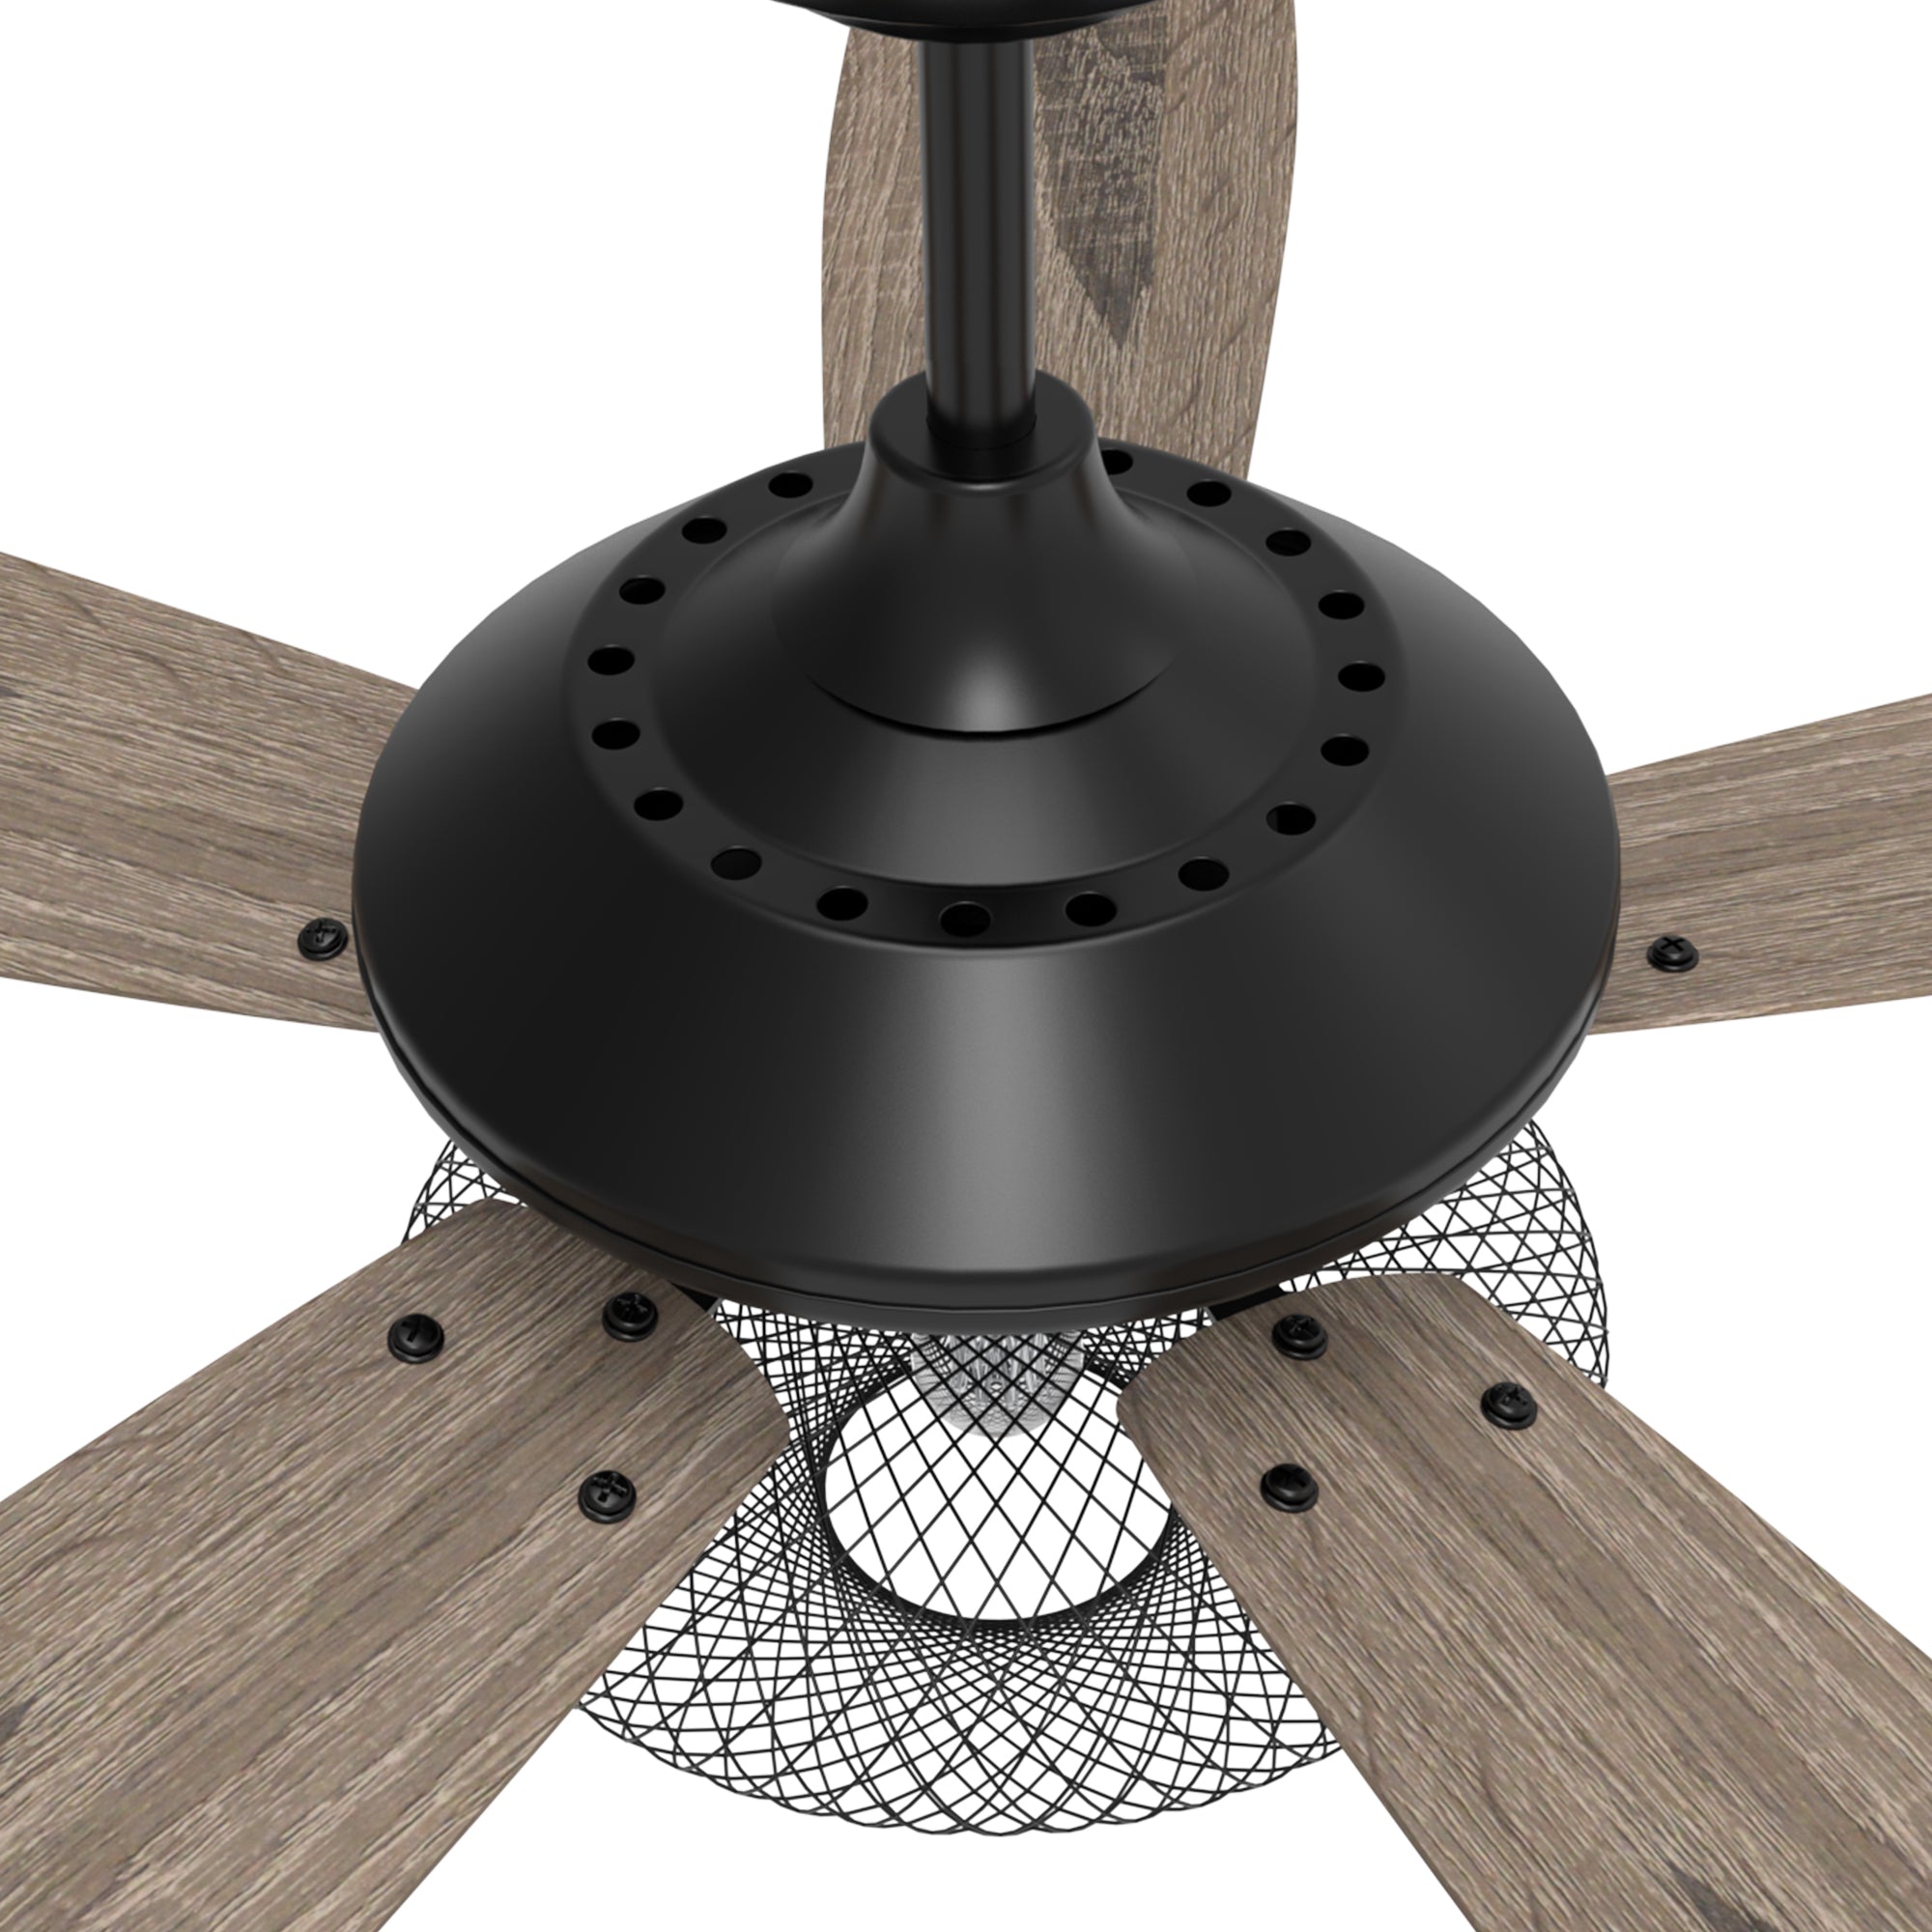 This Smafan Keller 52&#39;&#39;ceiling fan keeps your space cool, bright, and stylish. It is a soft modern masterpiece perfect for your large indoor living spaces. This ceiling fan is a simplicity designing with black finish, use elegant Plywood blades and compatible with LED bulb(Not included). The fan features remote control.